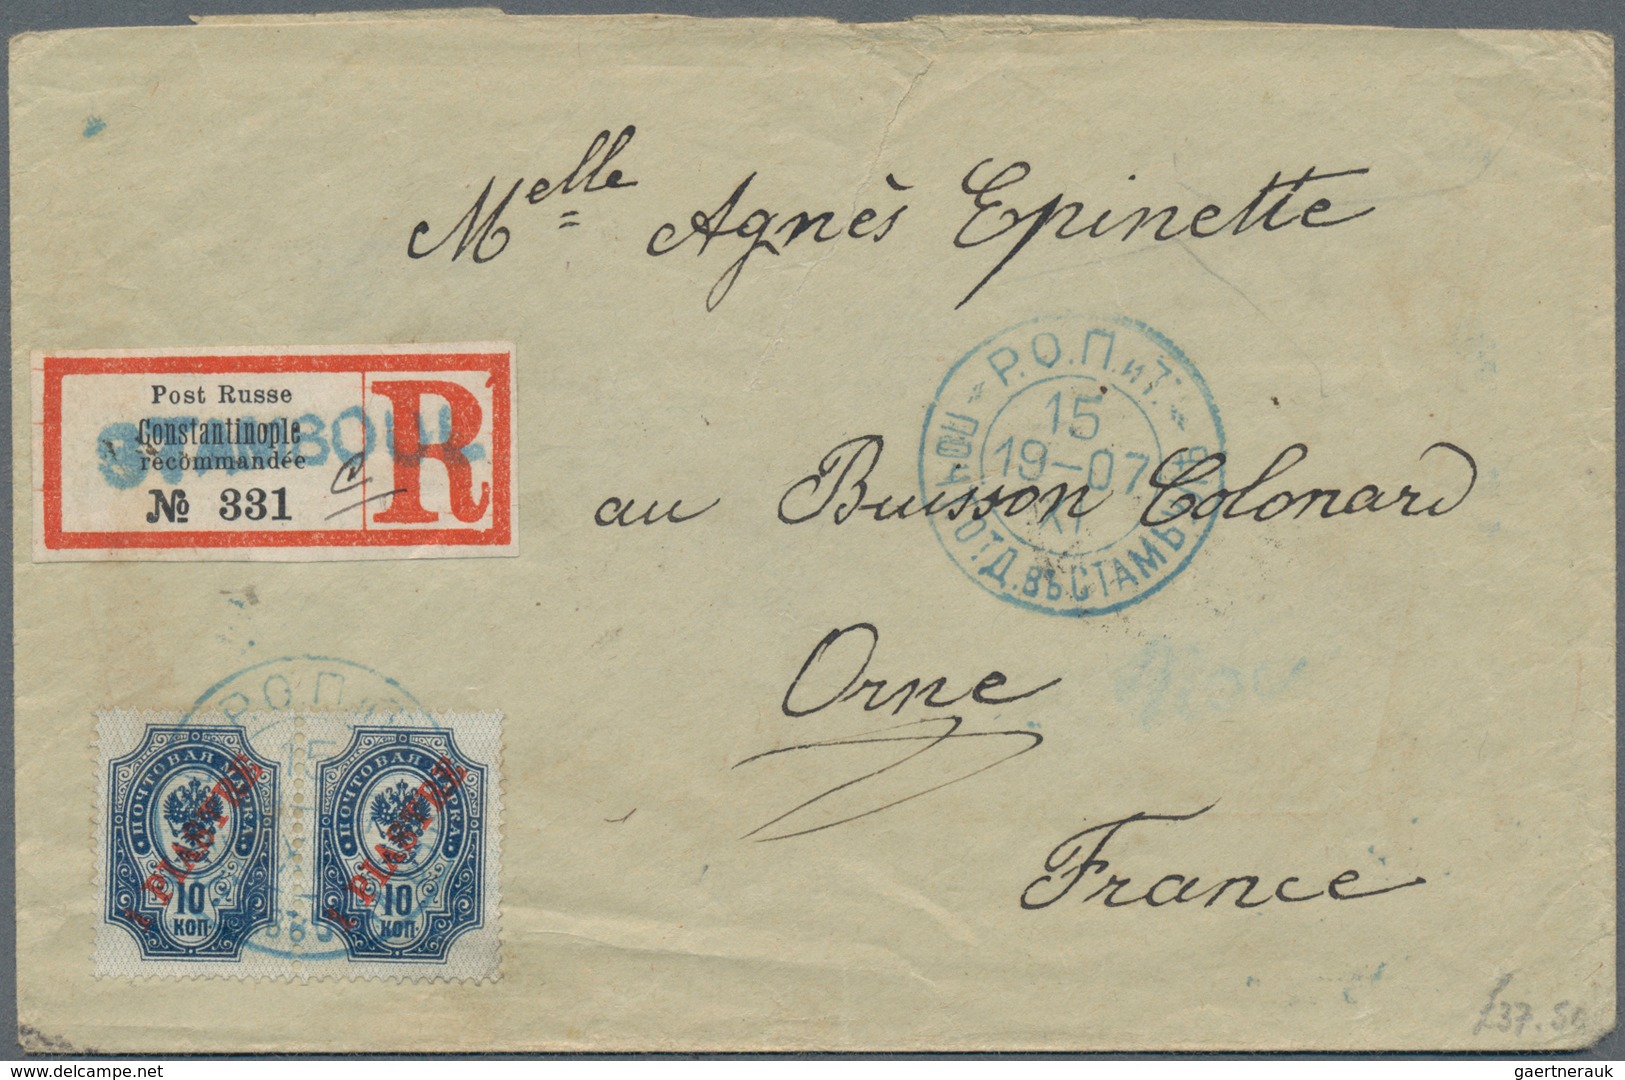 Russische Post In Der Levante - Staatspost: 1907, 1 Pia. On 10 K Blue Overprint Pair With Blue Doubl - Levant